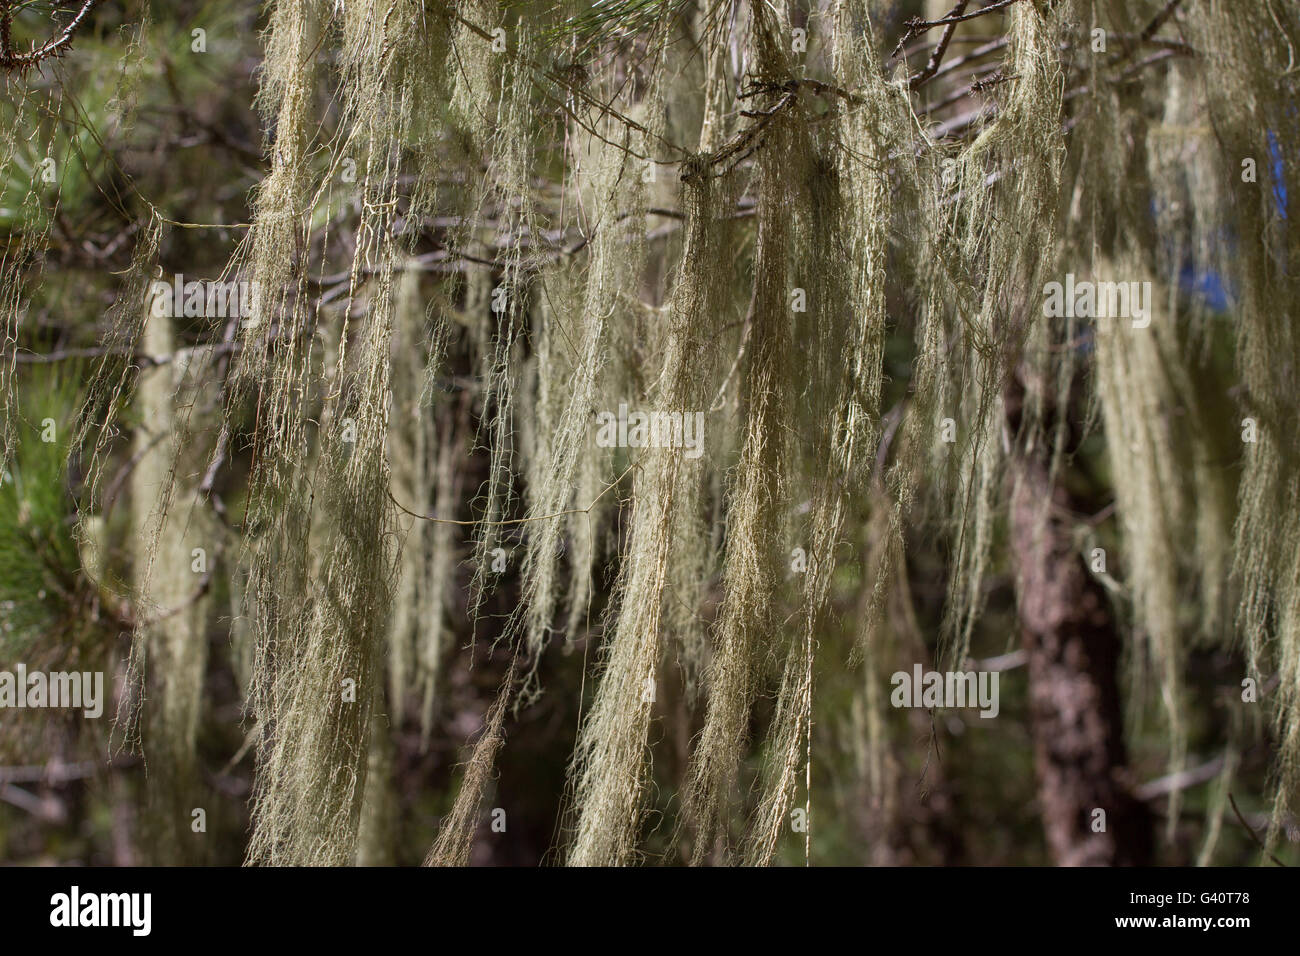 Long hair of Usnea barbata. Old pine forest in Tenerife, Canarian island Stock Photo